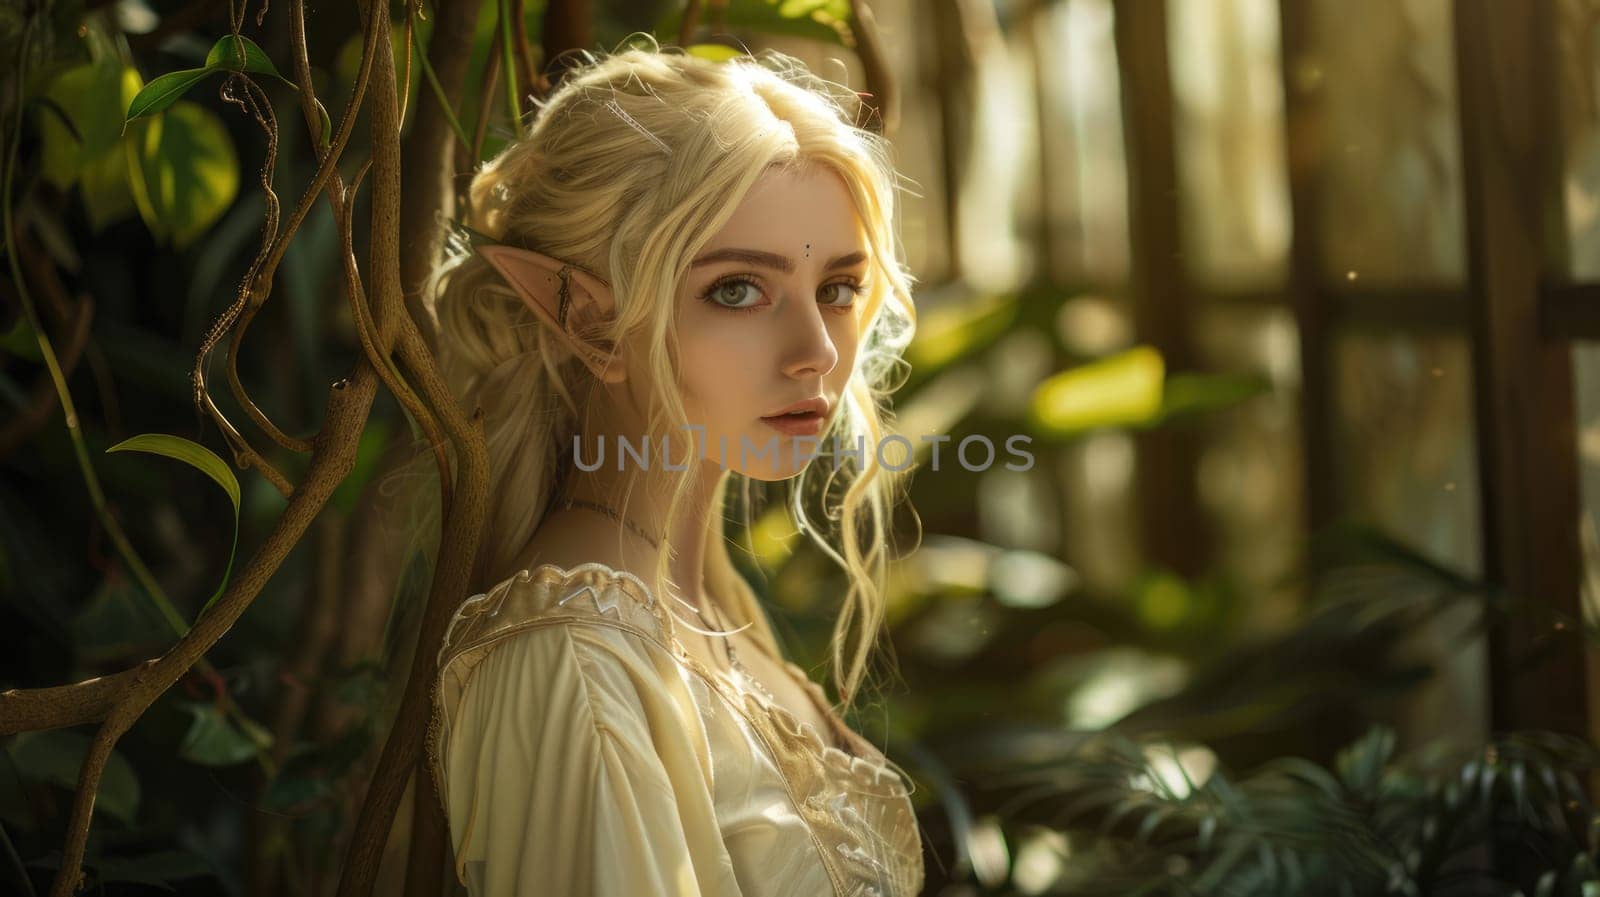 Girl in an elf costume against the backdrop of a cosplay event by natali_brill